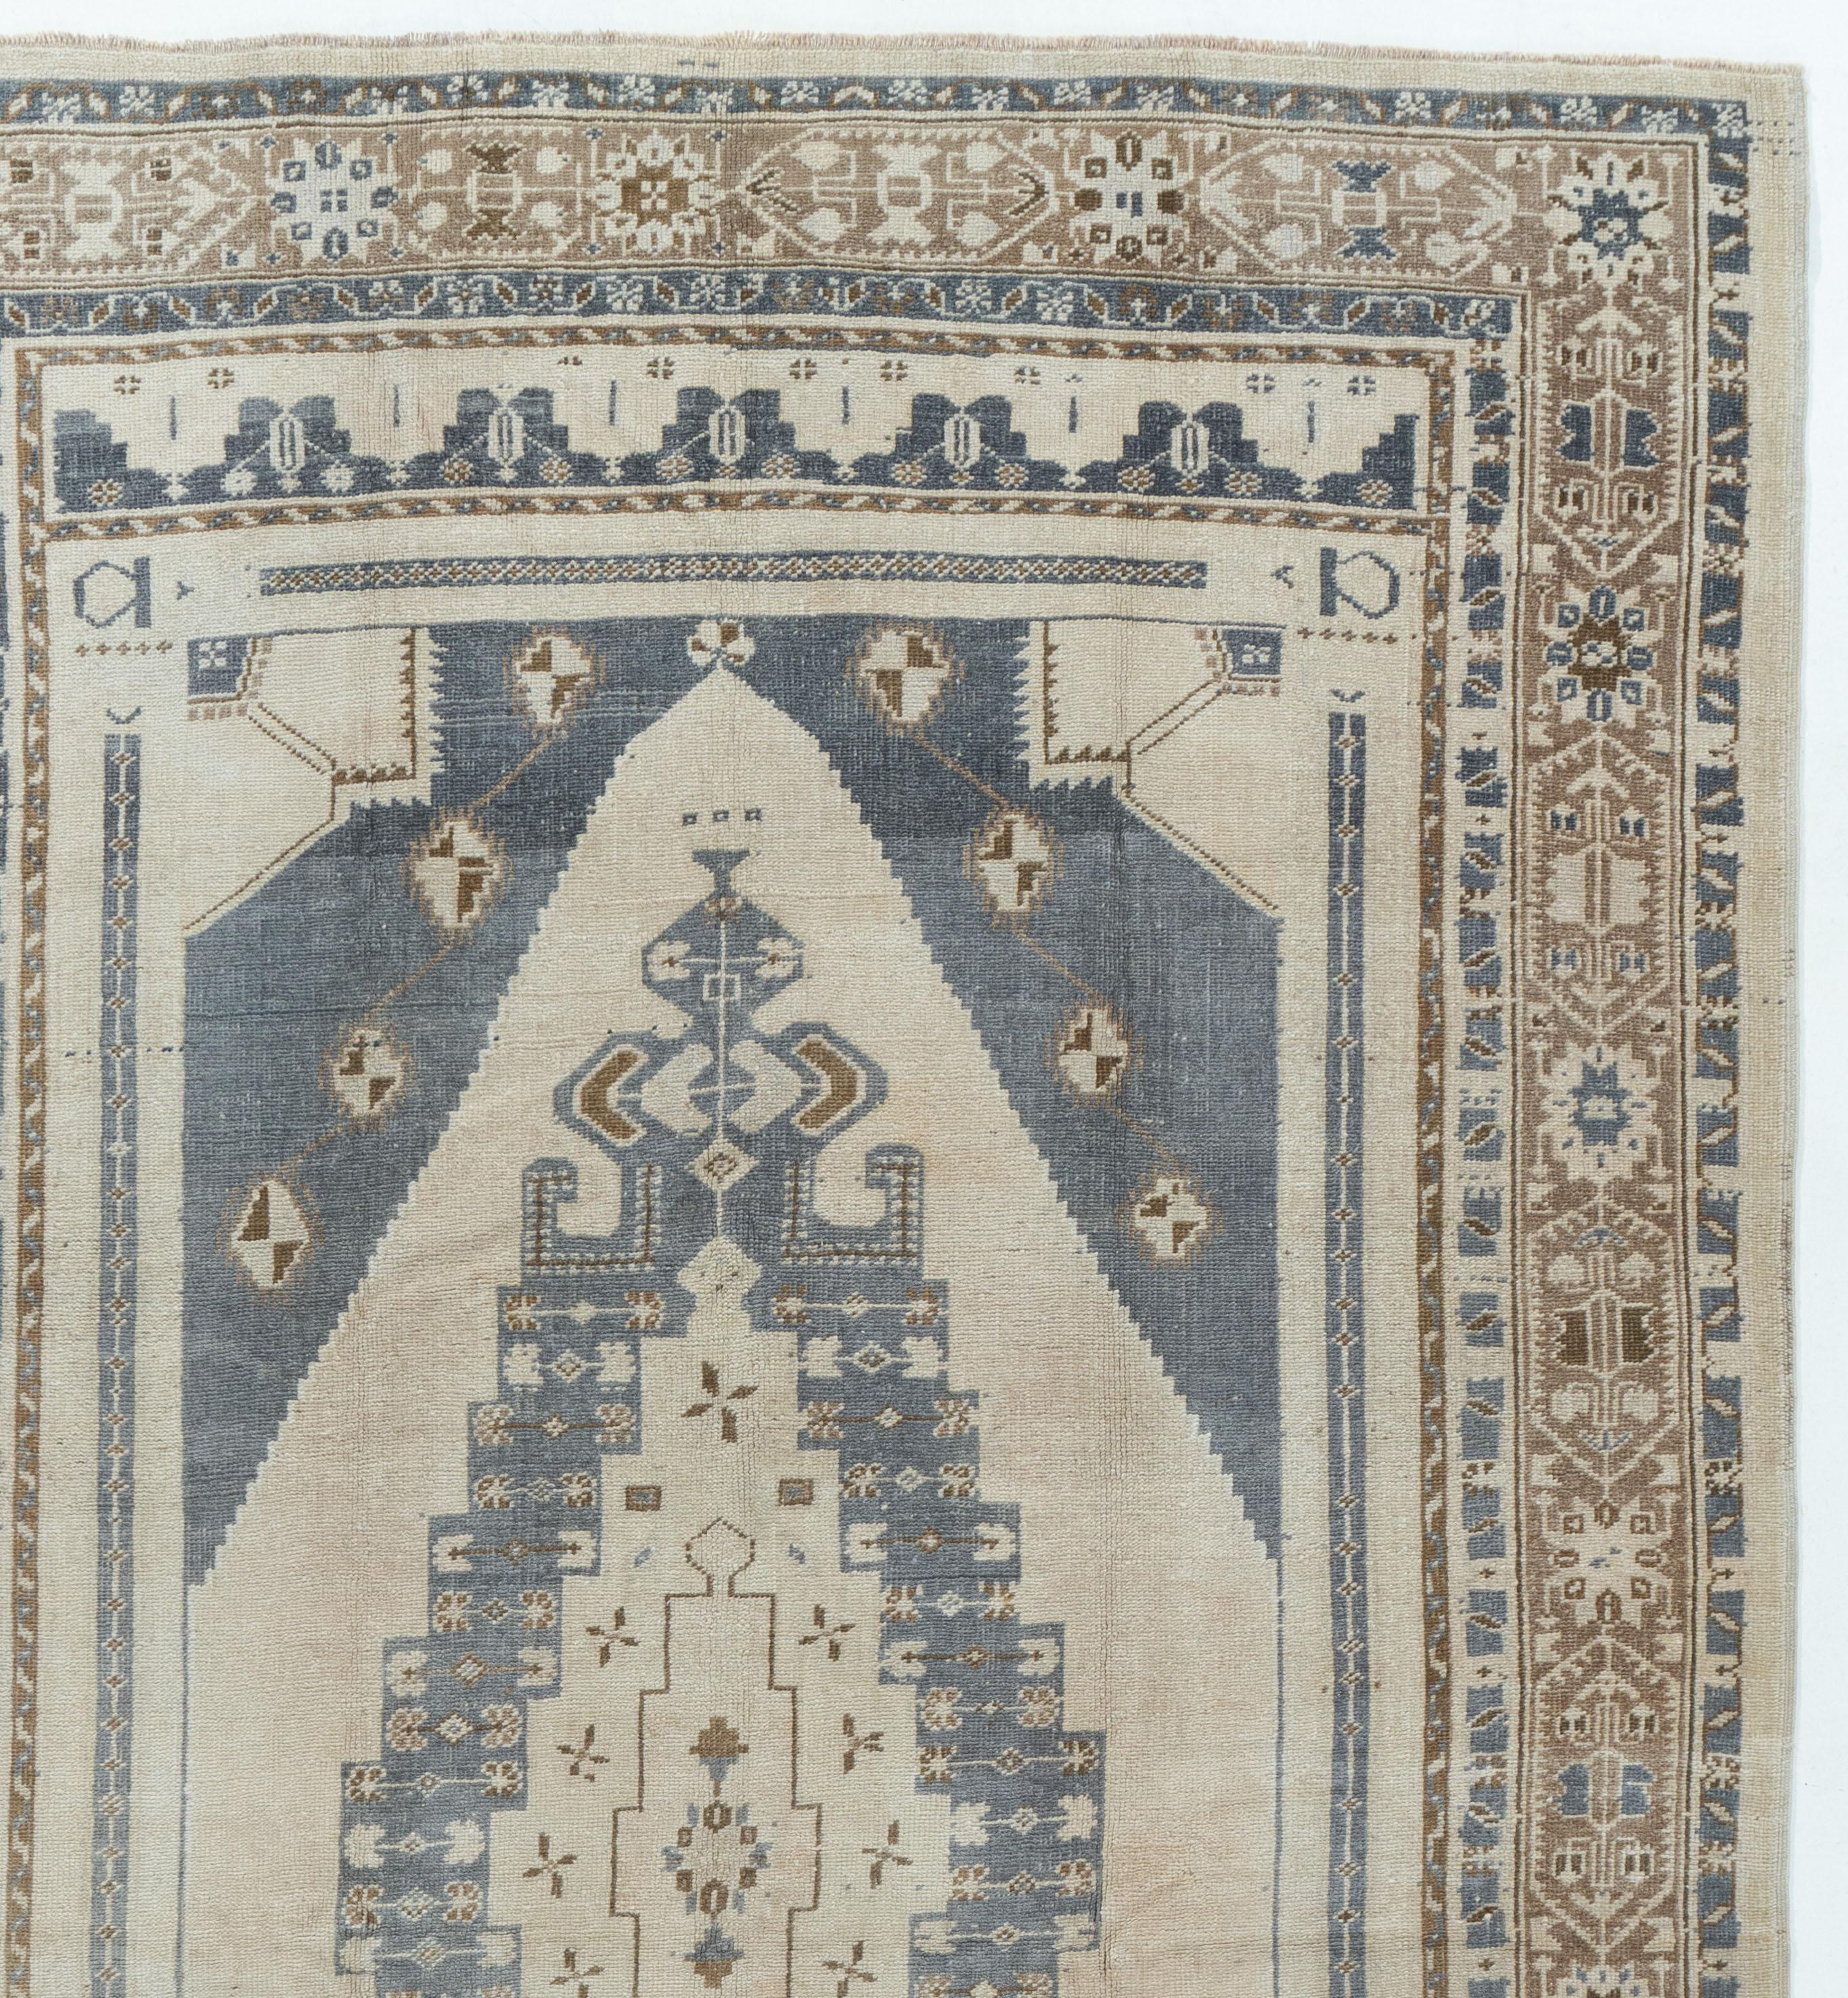 Vintage Turkish Oushak Rug 4'9 x 8'4.  Hand-woven in Turkey where rug weaving is the culture rather than a business. Rugs from Turkey are known for the high quality of their wool their beautiful patterns and warm colors. These designer favorites